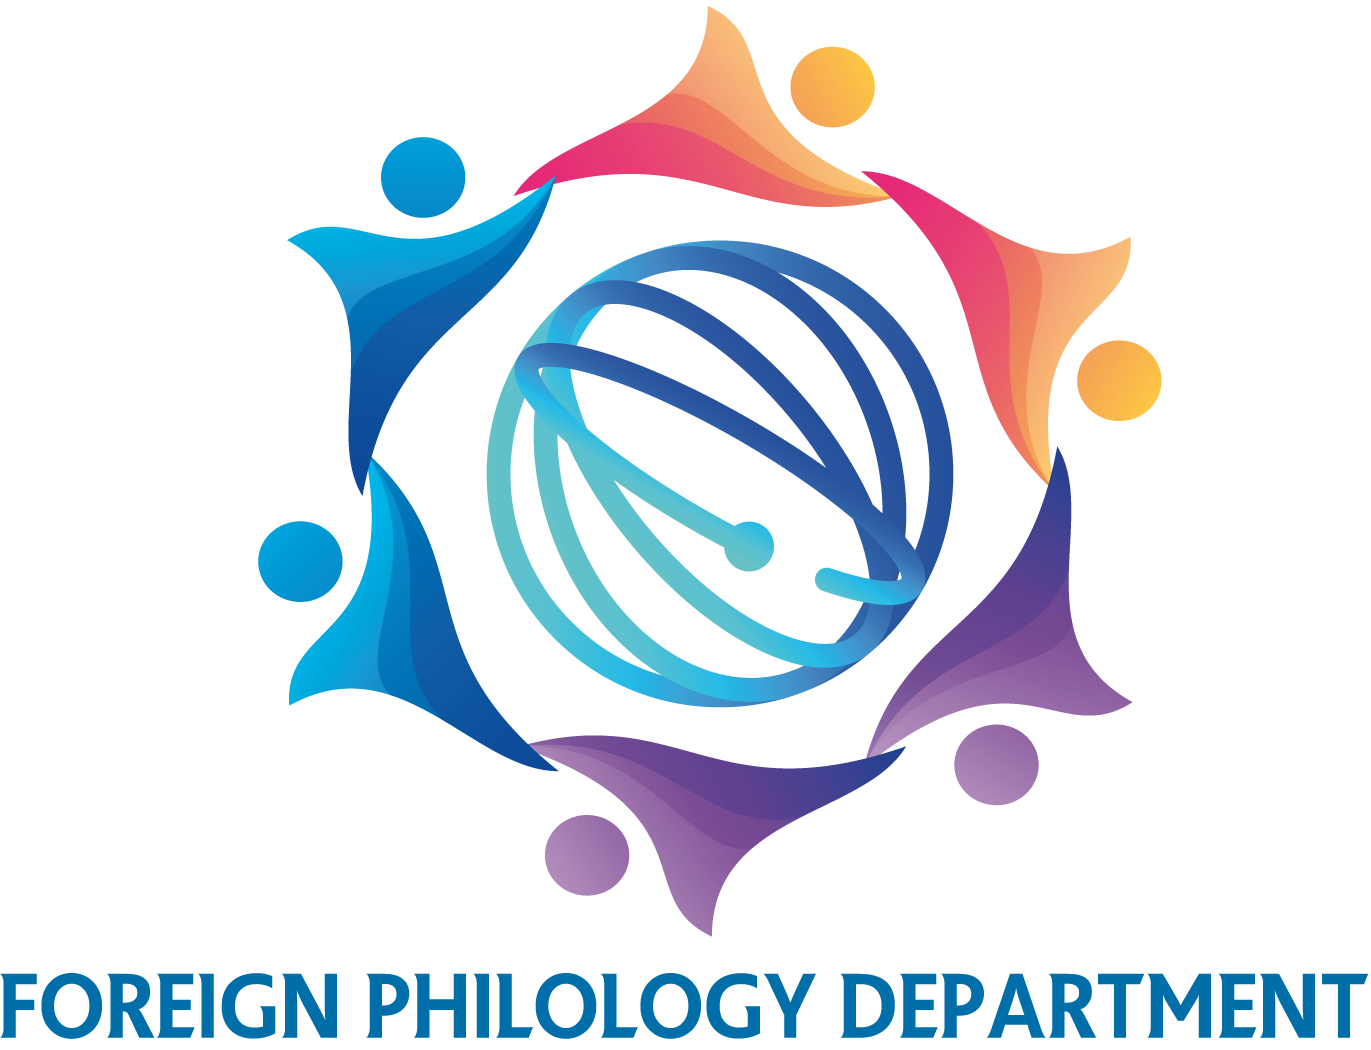 Foreign Philology Department